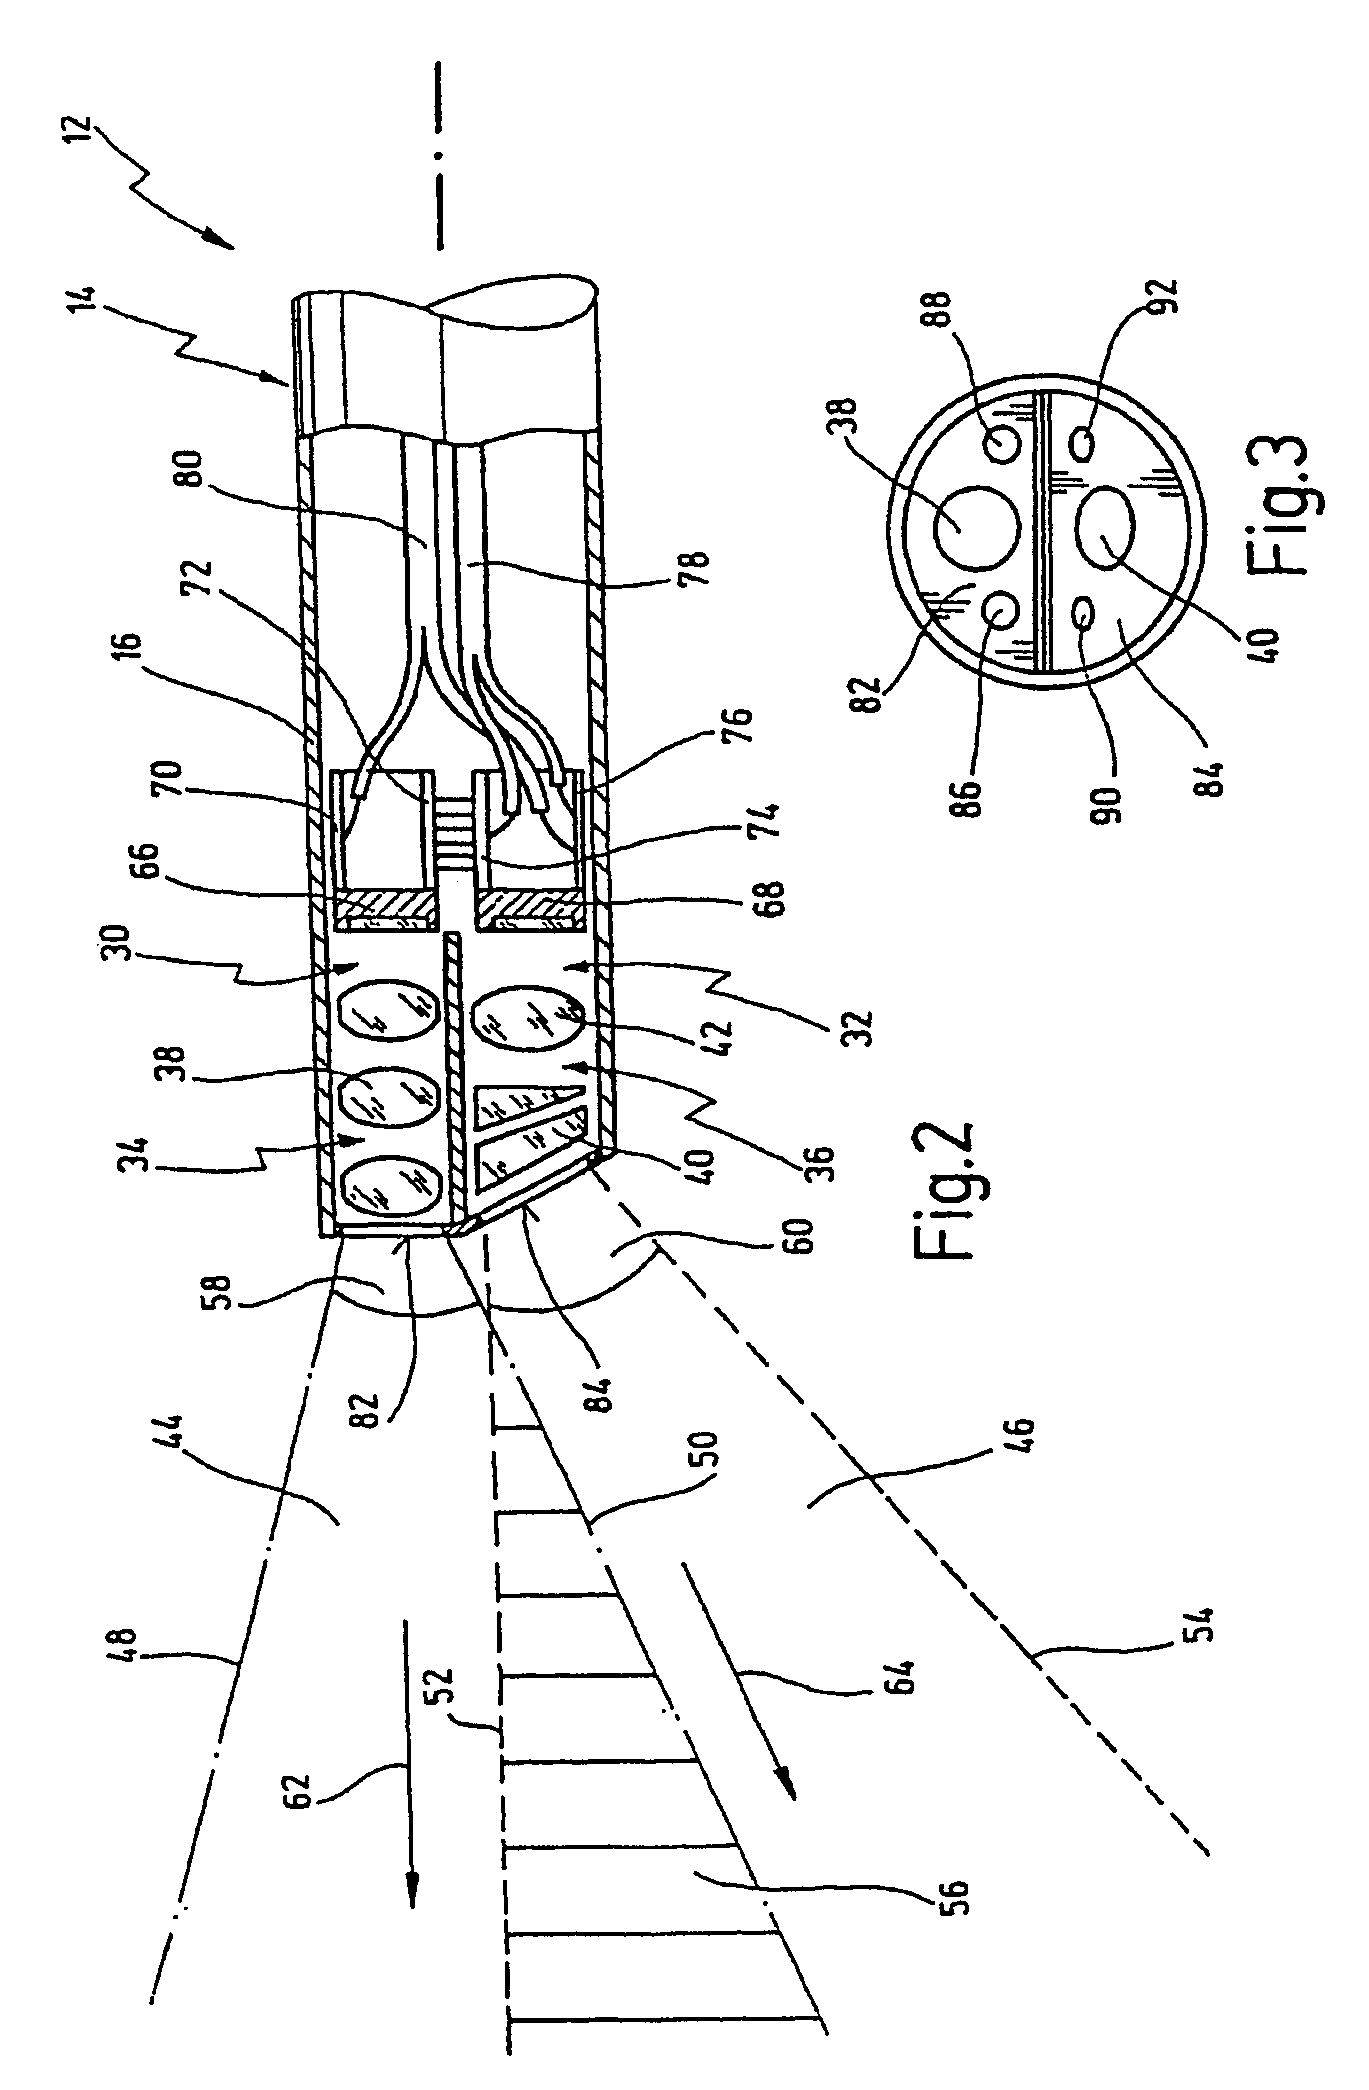 Endoscopic visualization apparatus with different imaging systems